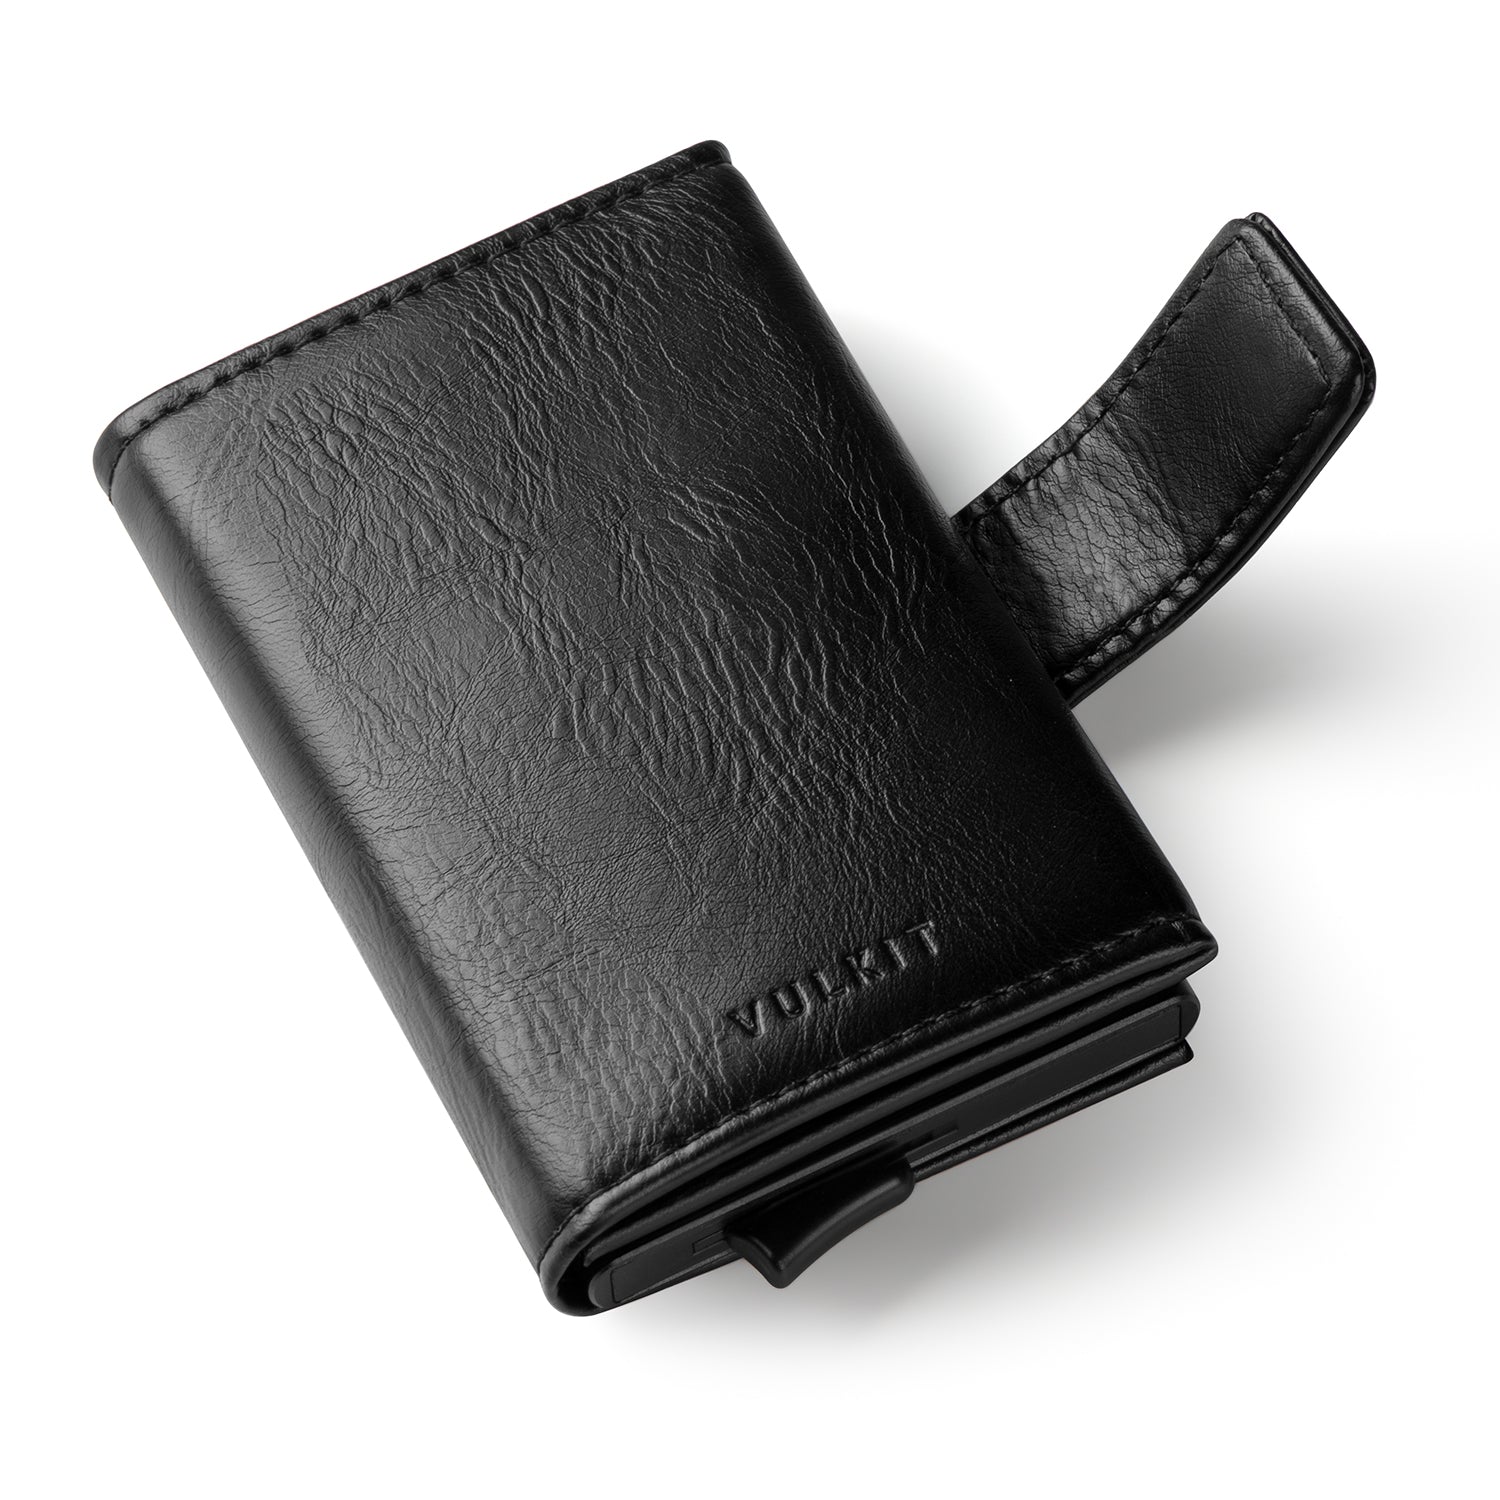 RFID Blocking Black Leather Trifold Wallet With Flip Up ID Holder